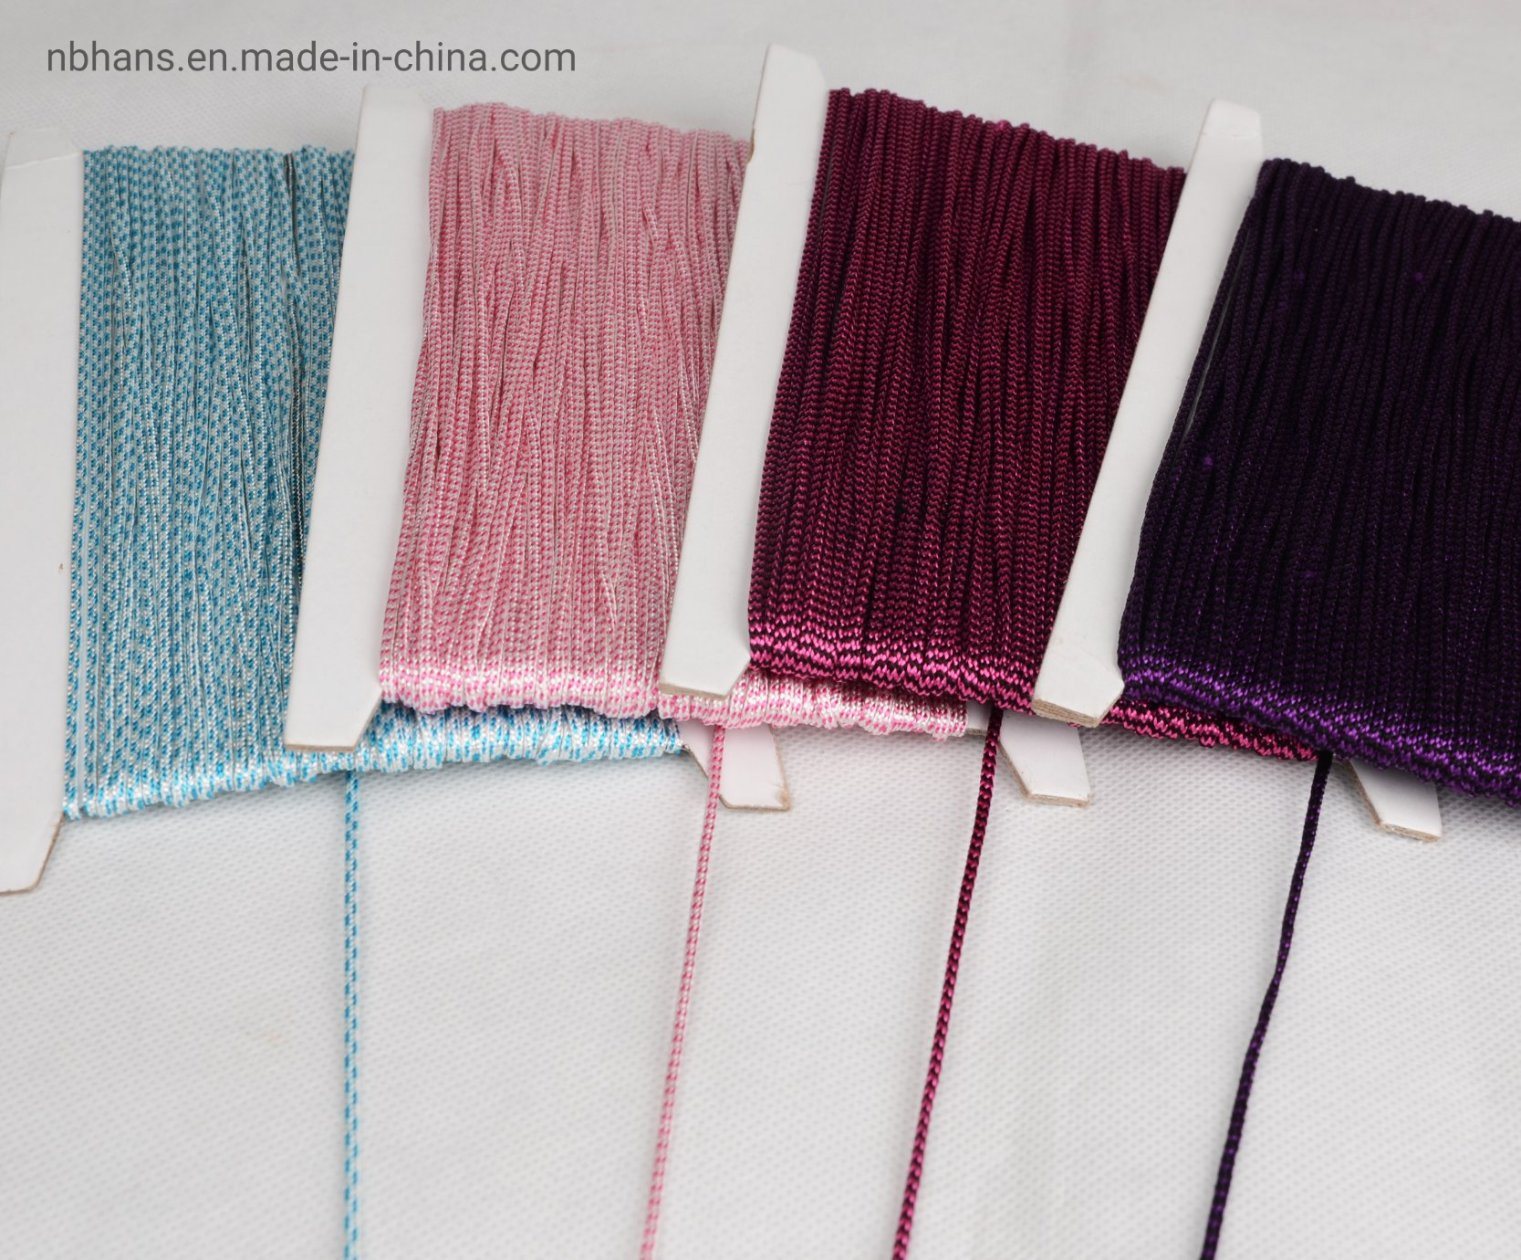 Wholesale Flat 100 % Rayon Cord Japan Type Plain 144yds Pure Color Twin Color for Machine Sewing Garment